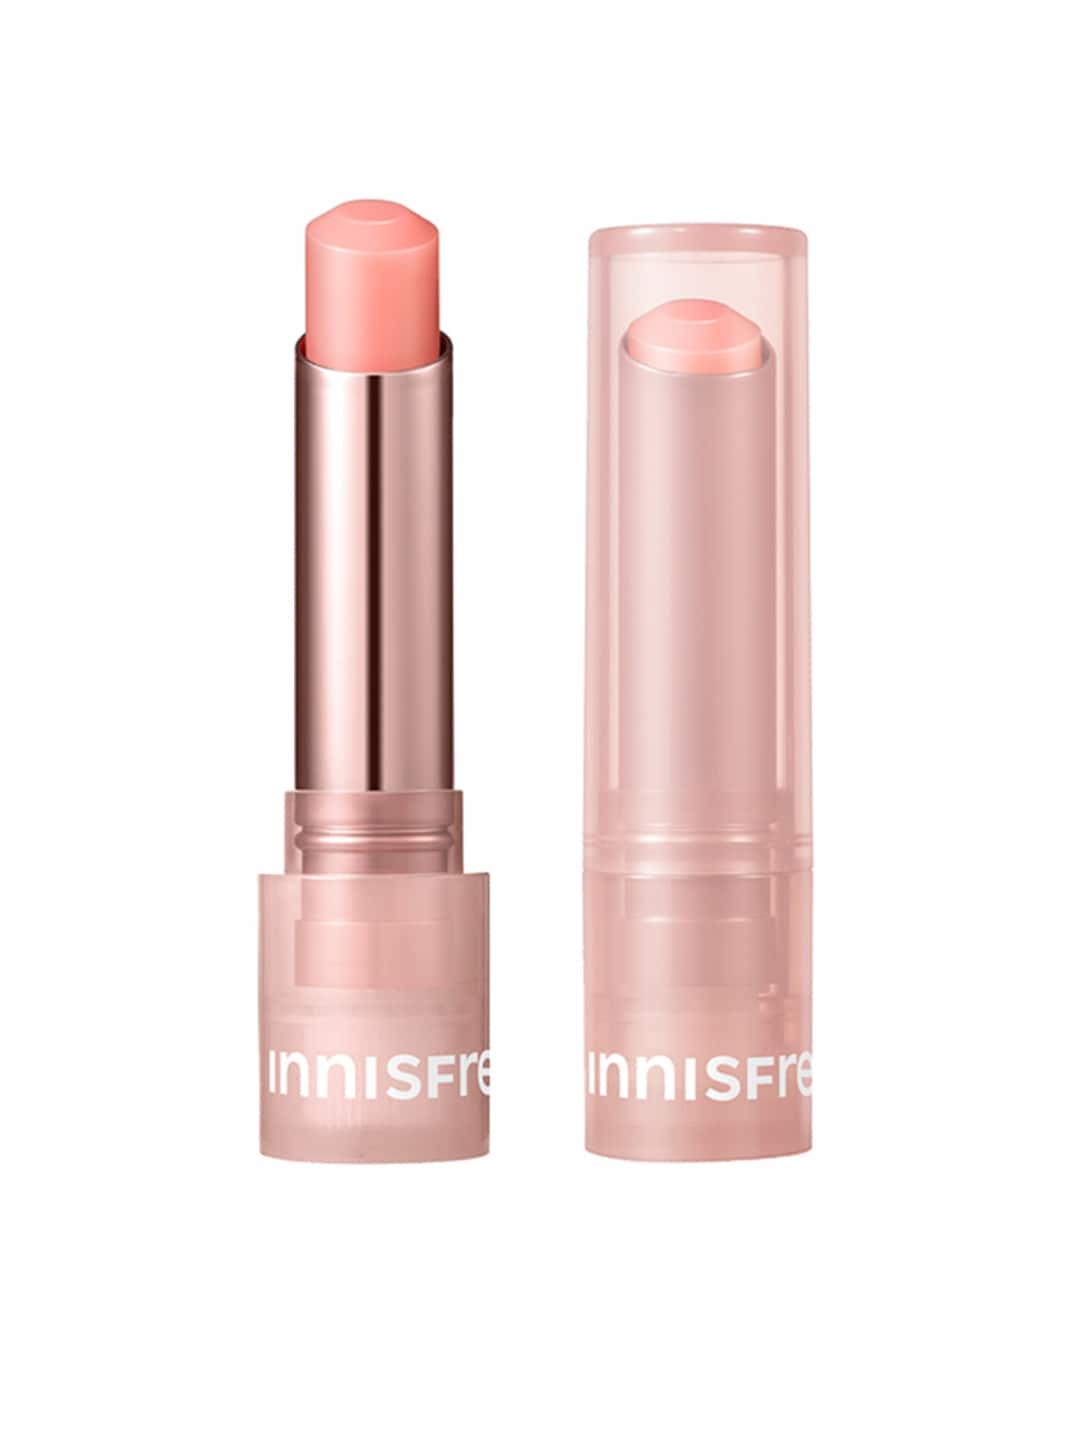 innisfree dewy tint lip balm with jeju camelia seed oil & hyaluronic acid - baby pink 1